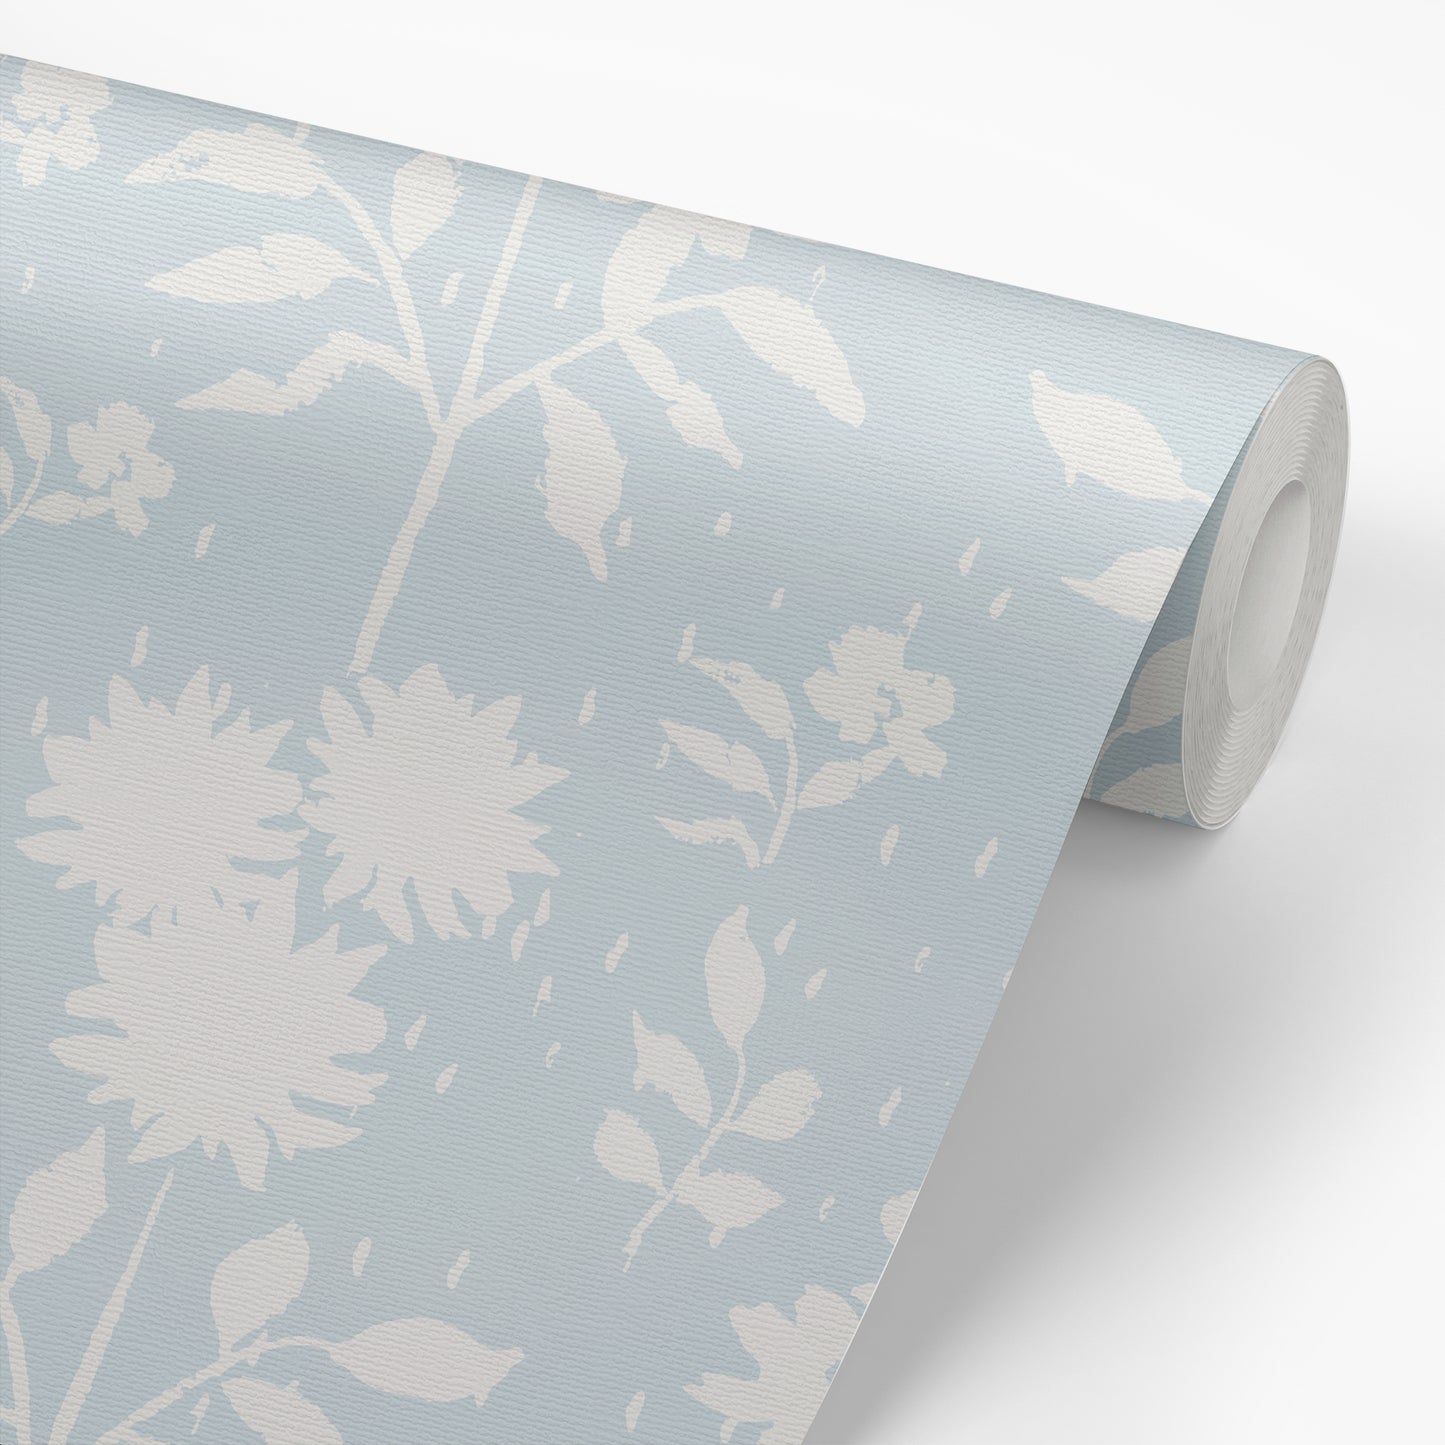 View of roll of peel-and-stick wallpaper with a design of white florals with a light blue background